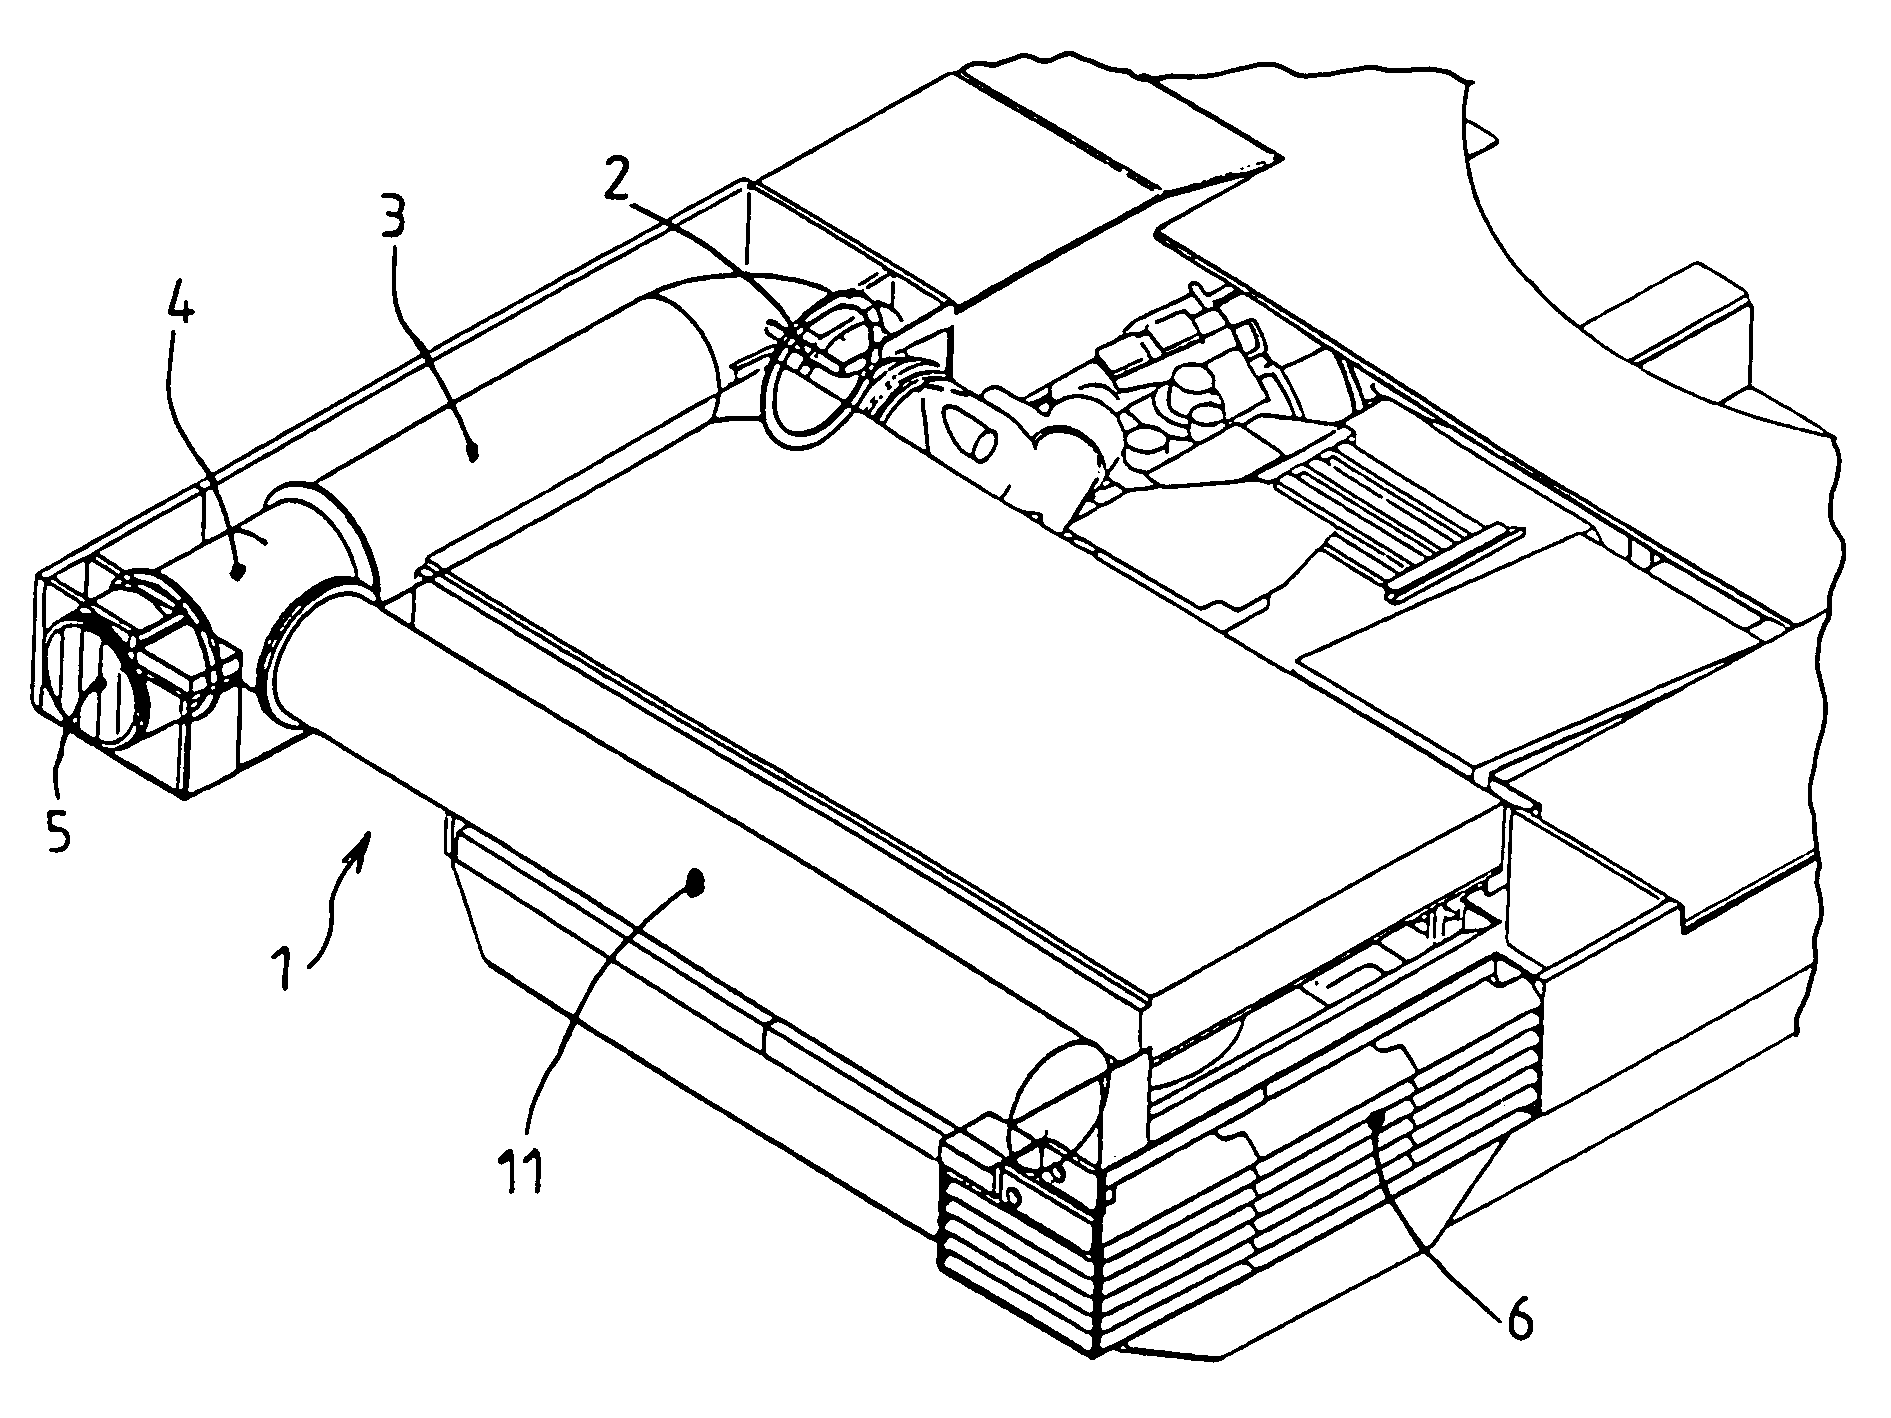 Exhaust device with or without dilution based on two controllable outputs